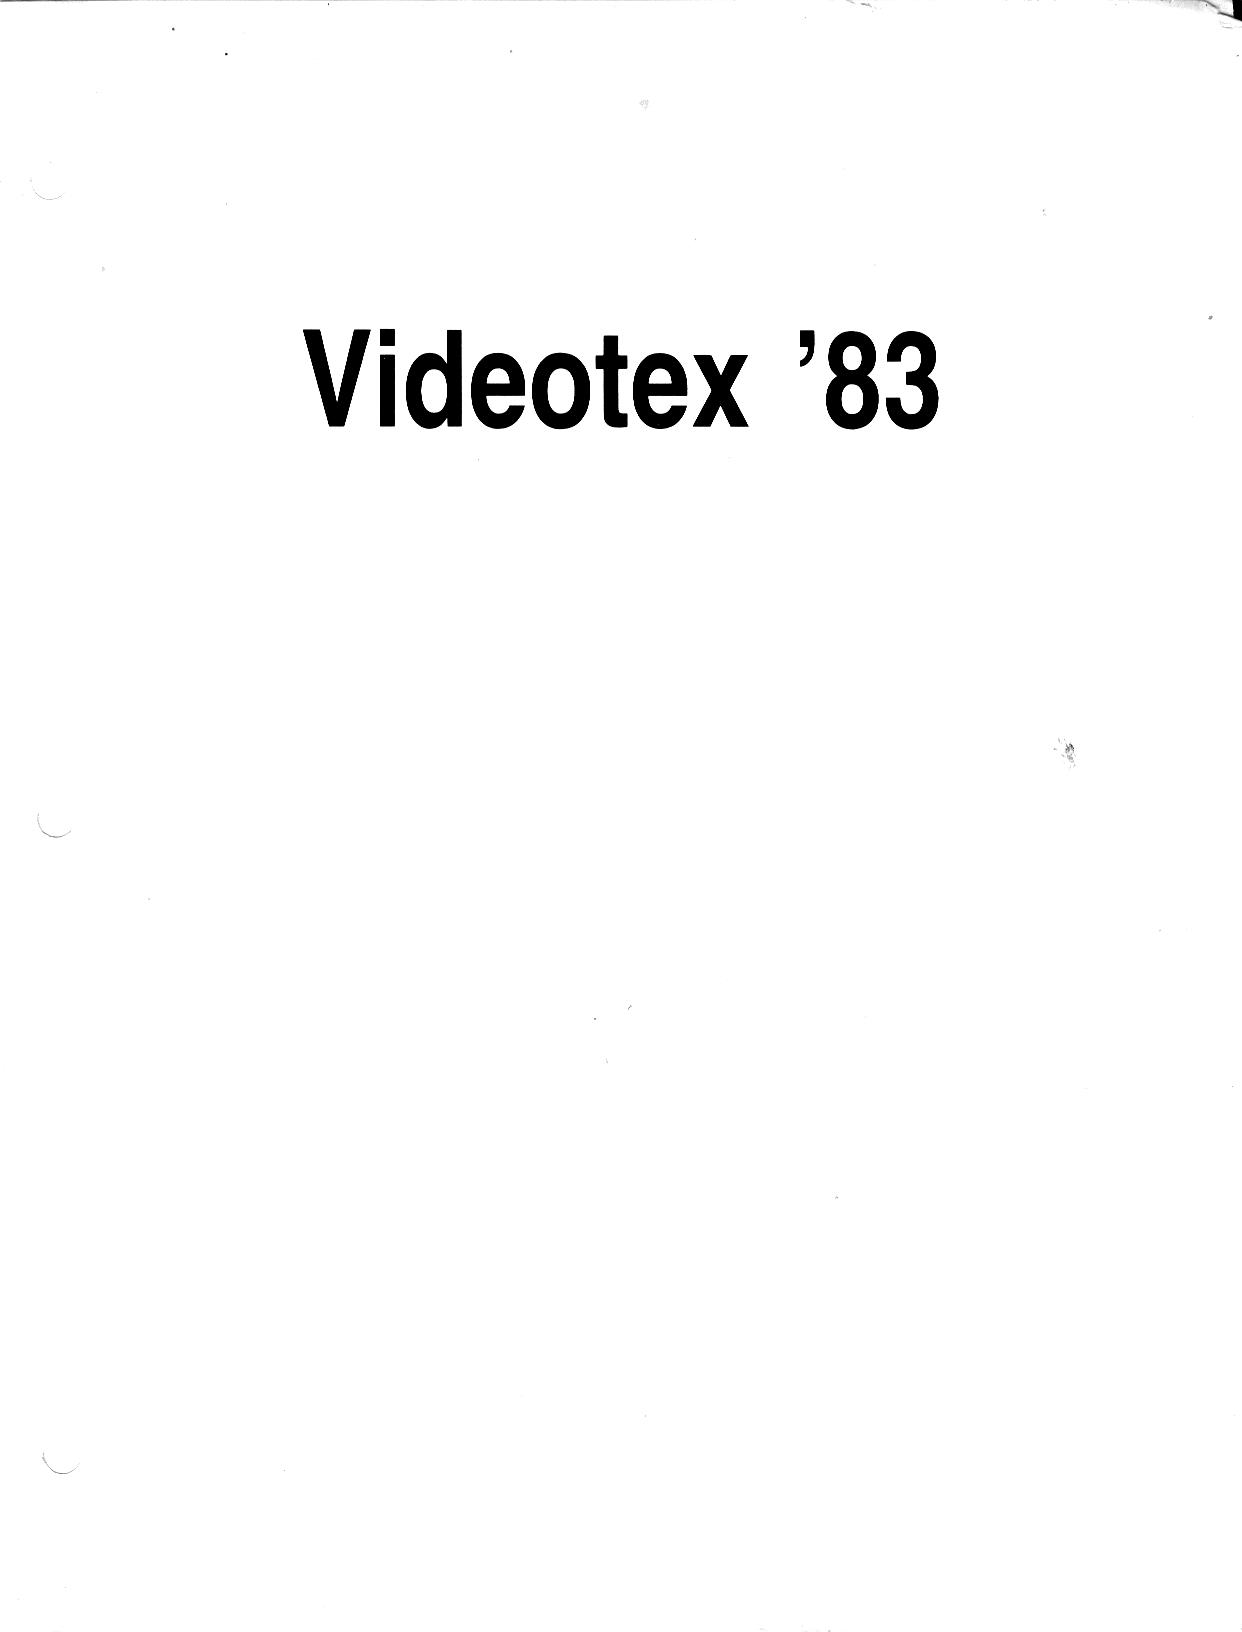 Videotex '83 Proceedings - Cover Page